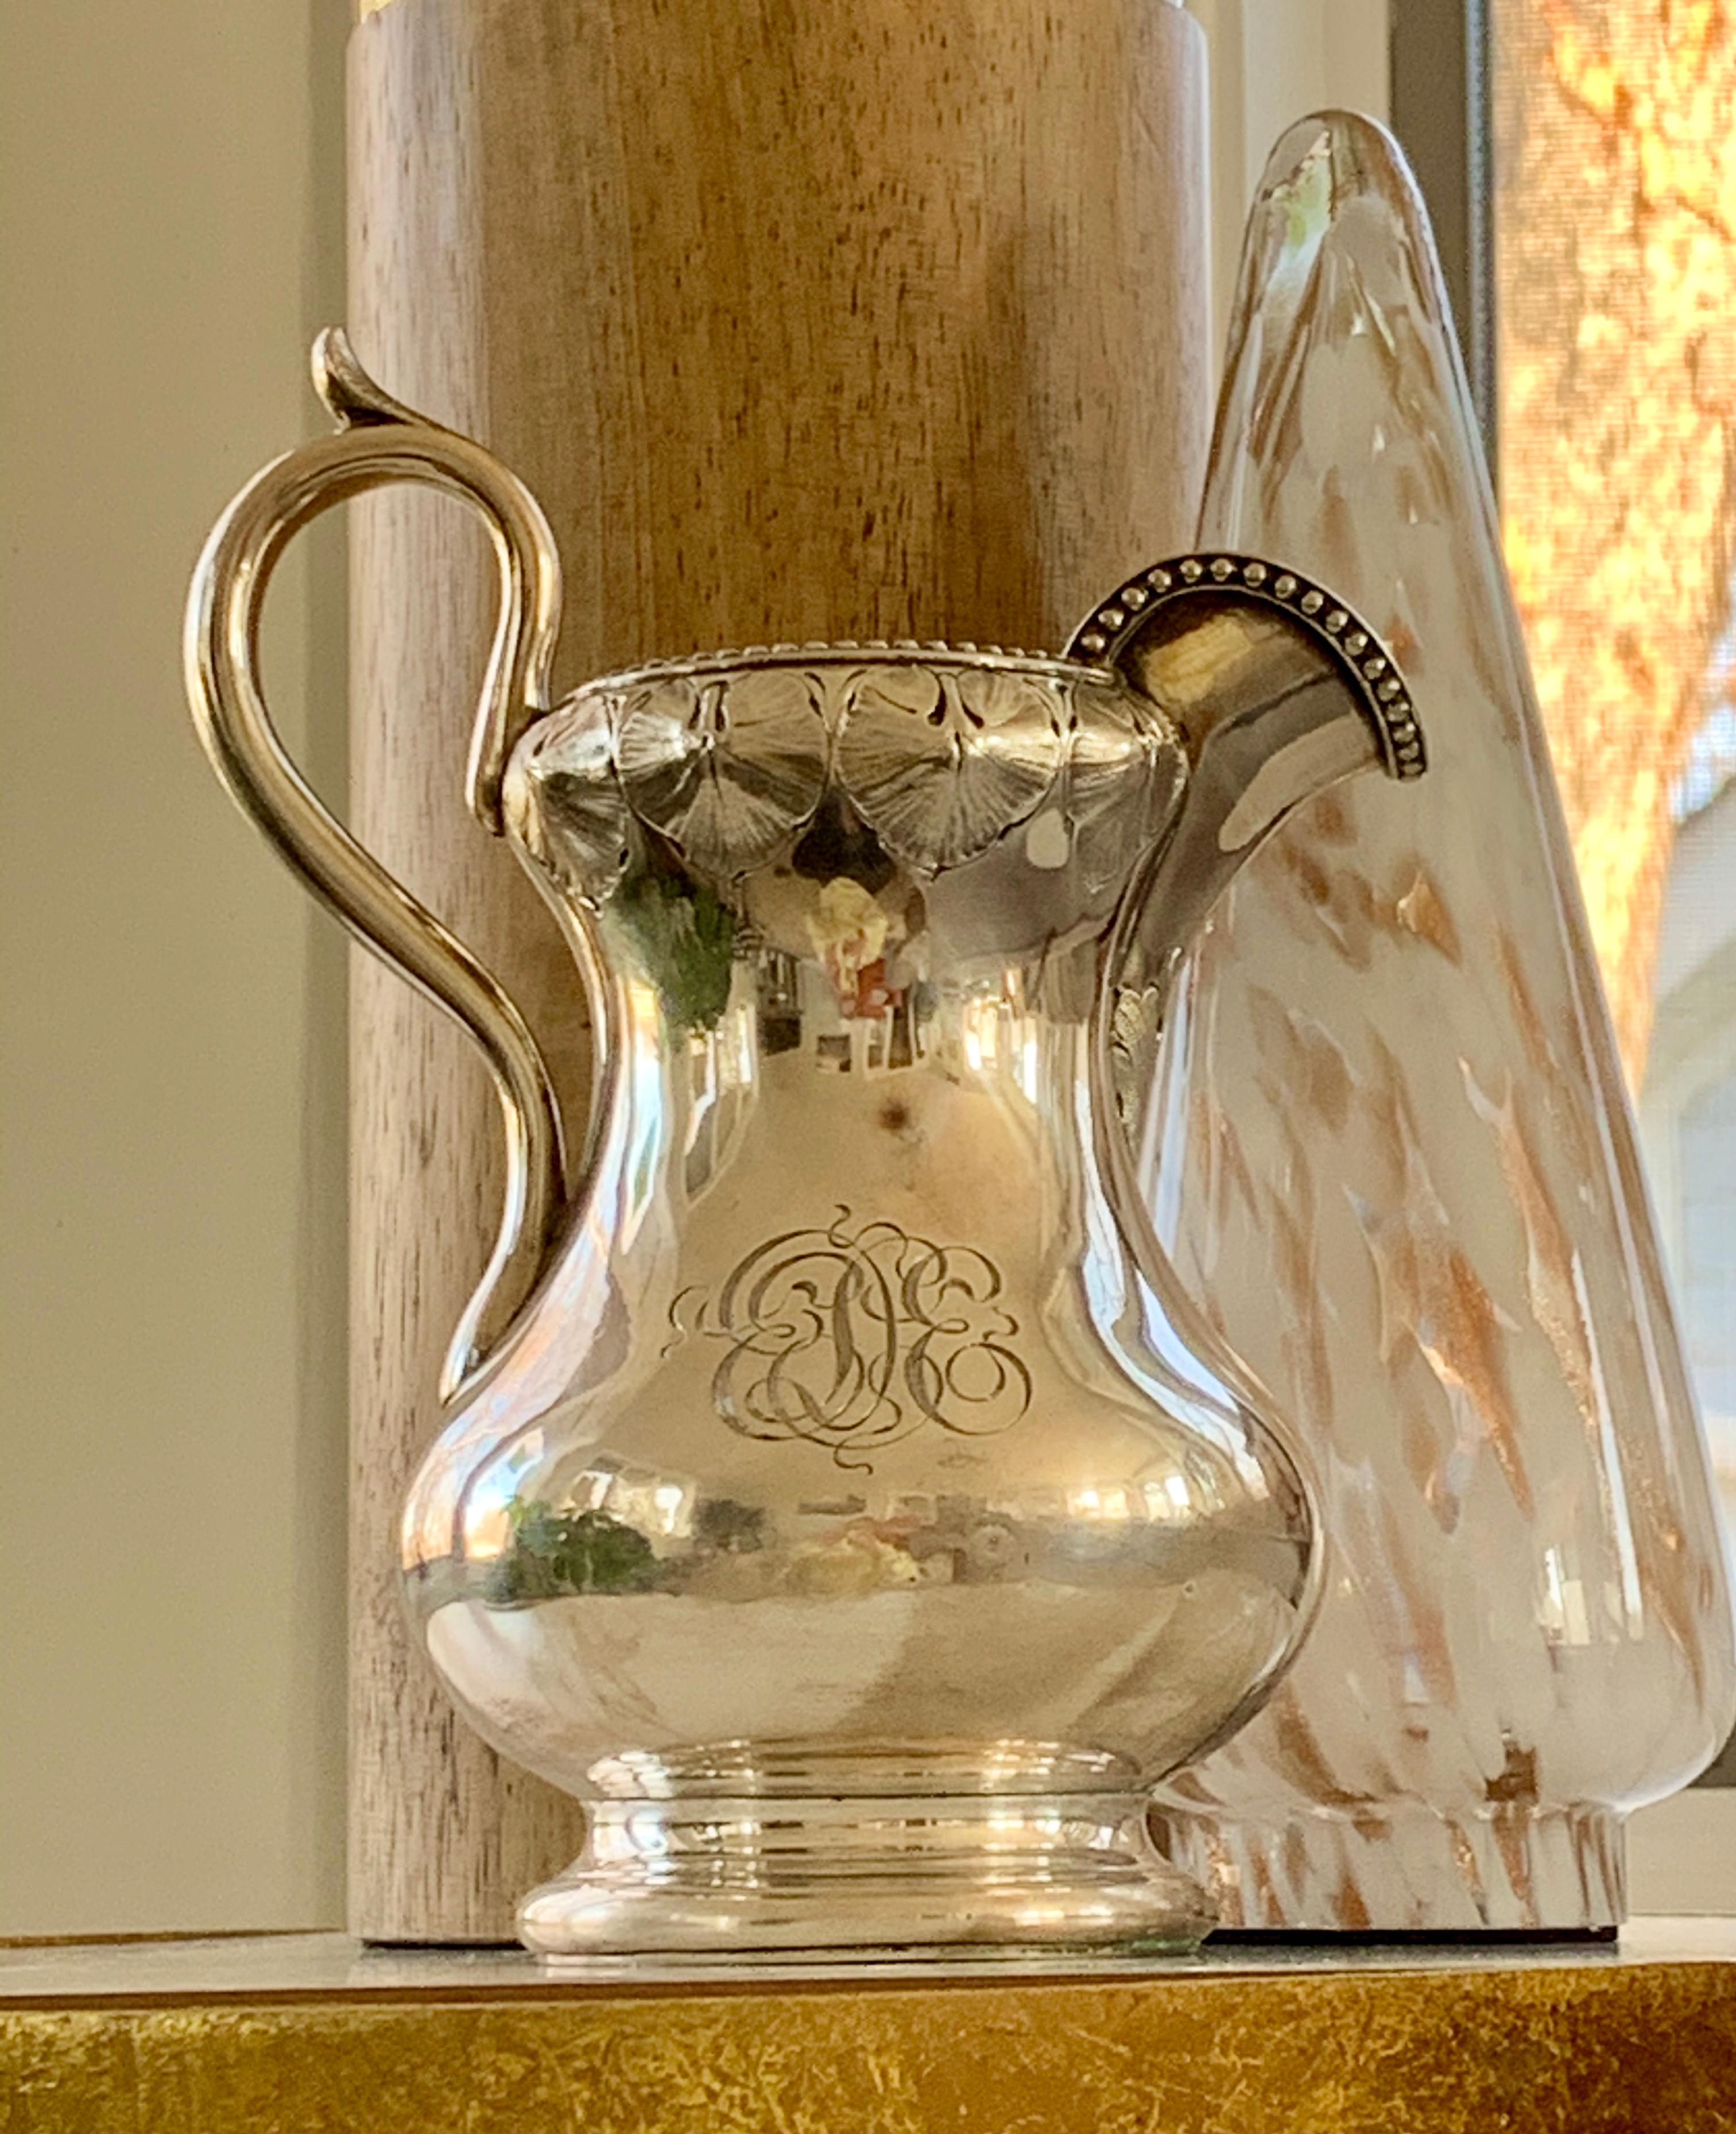 silver pitcher markings